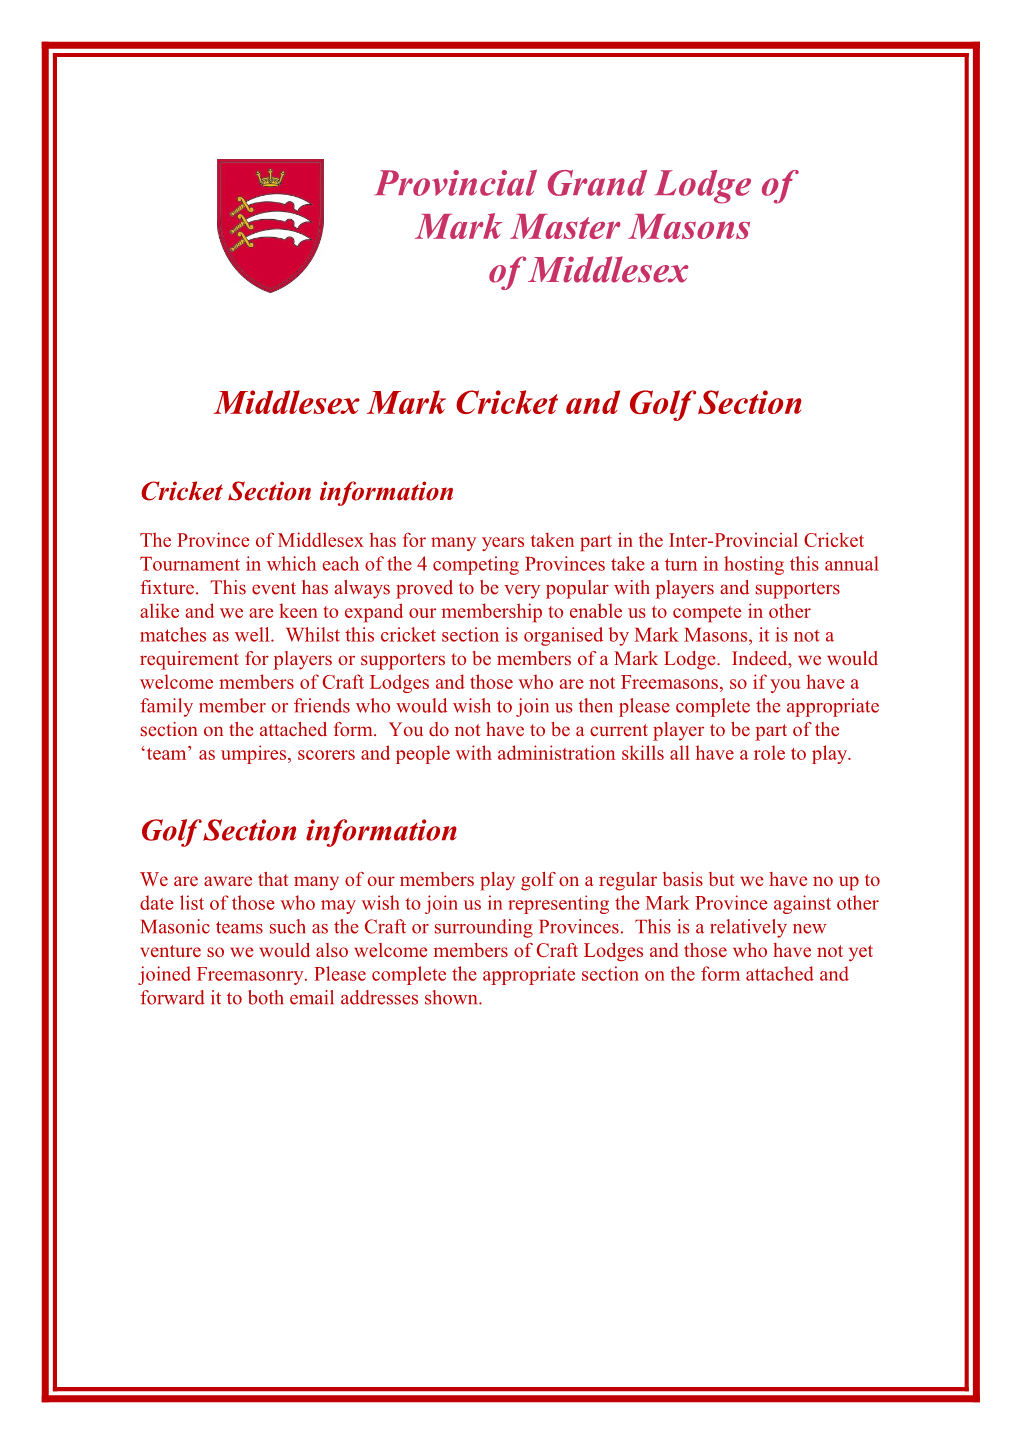 Middlesex Mark Cricket and Golf Section